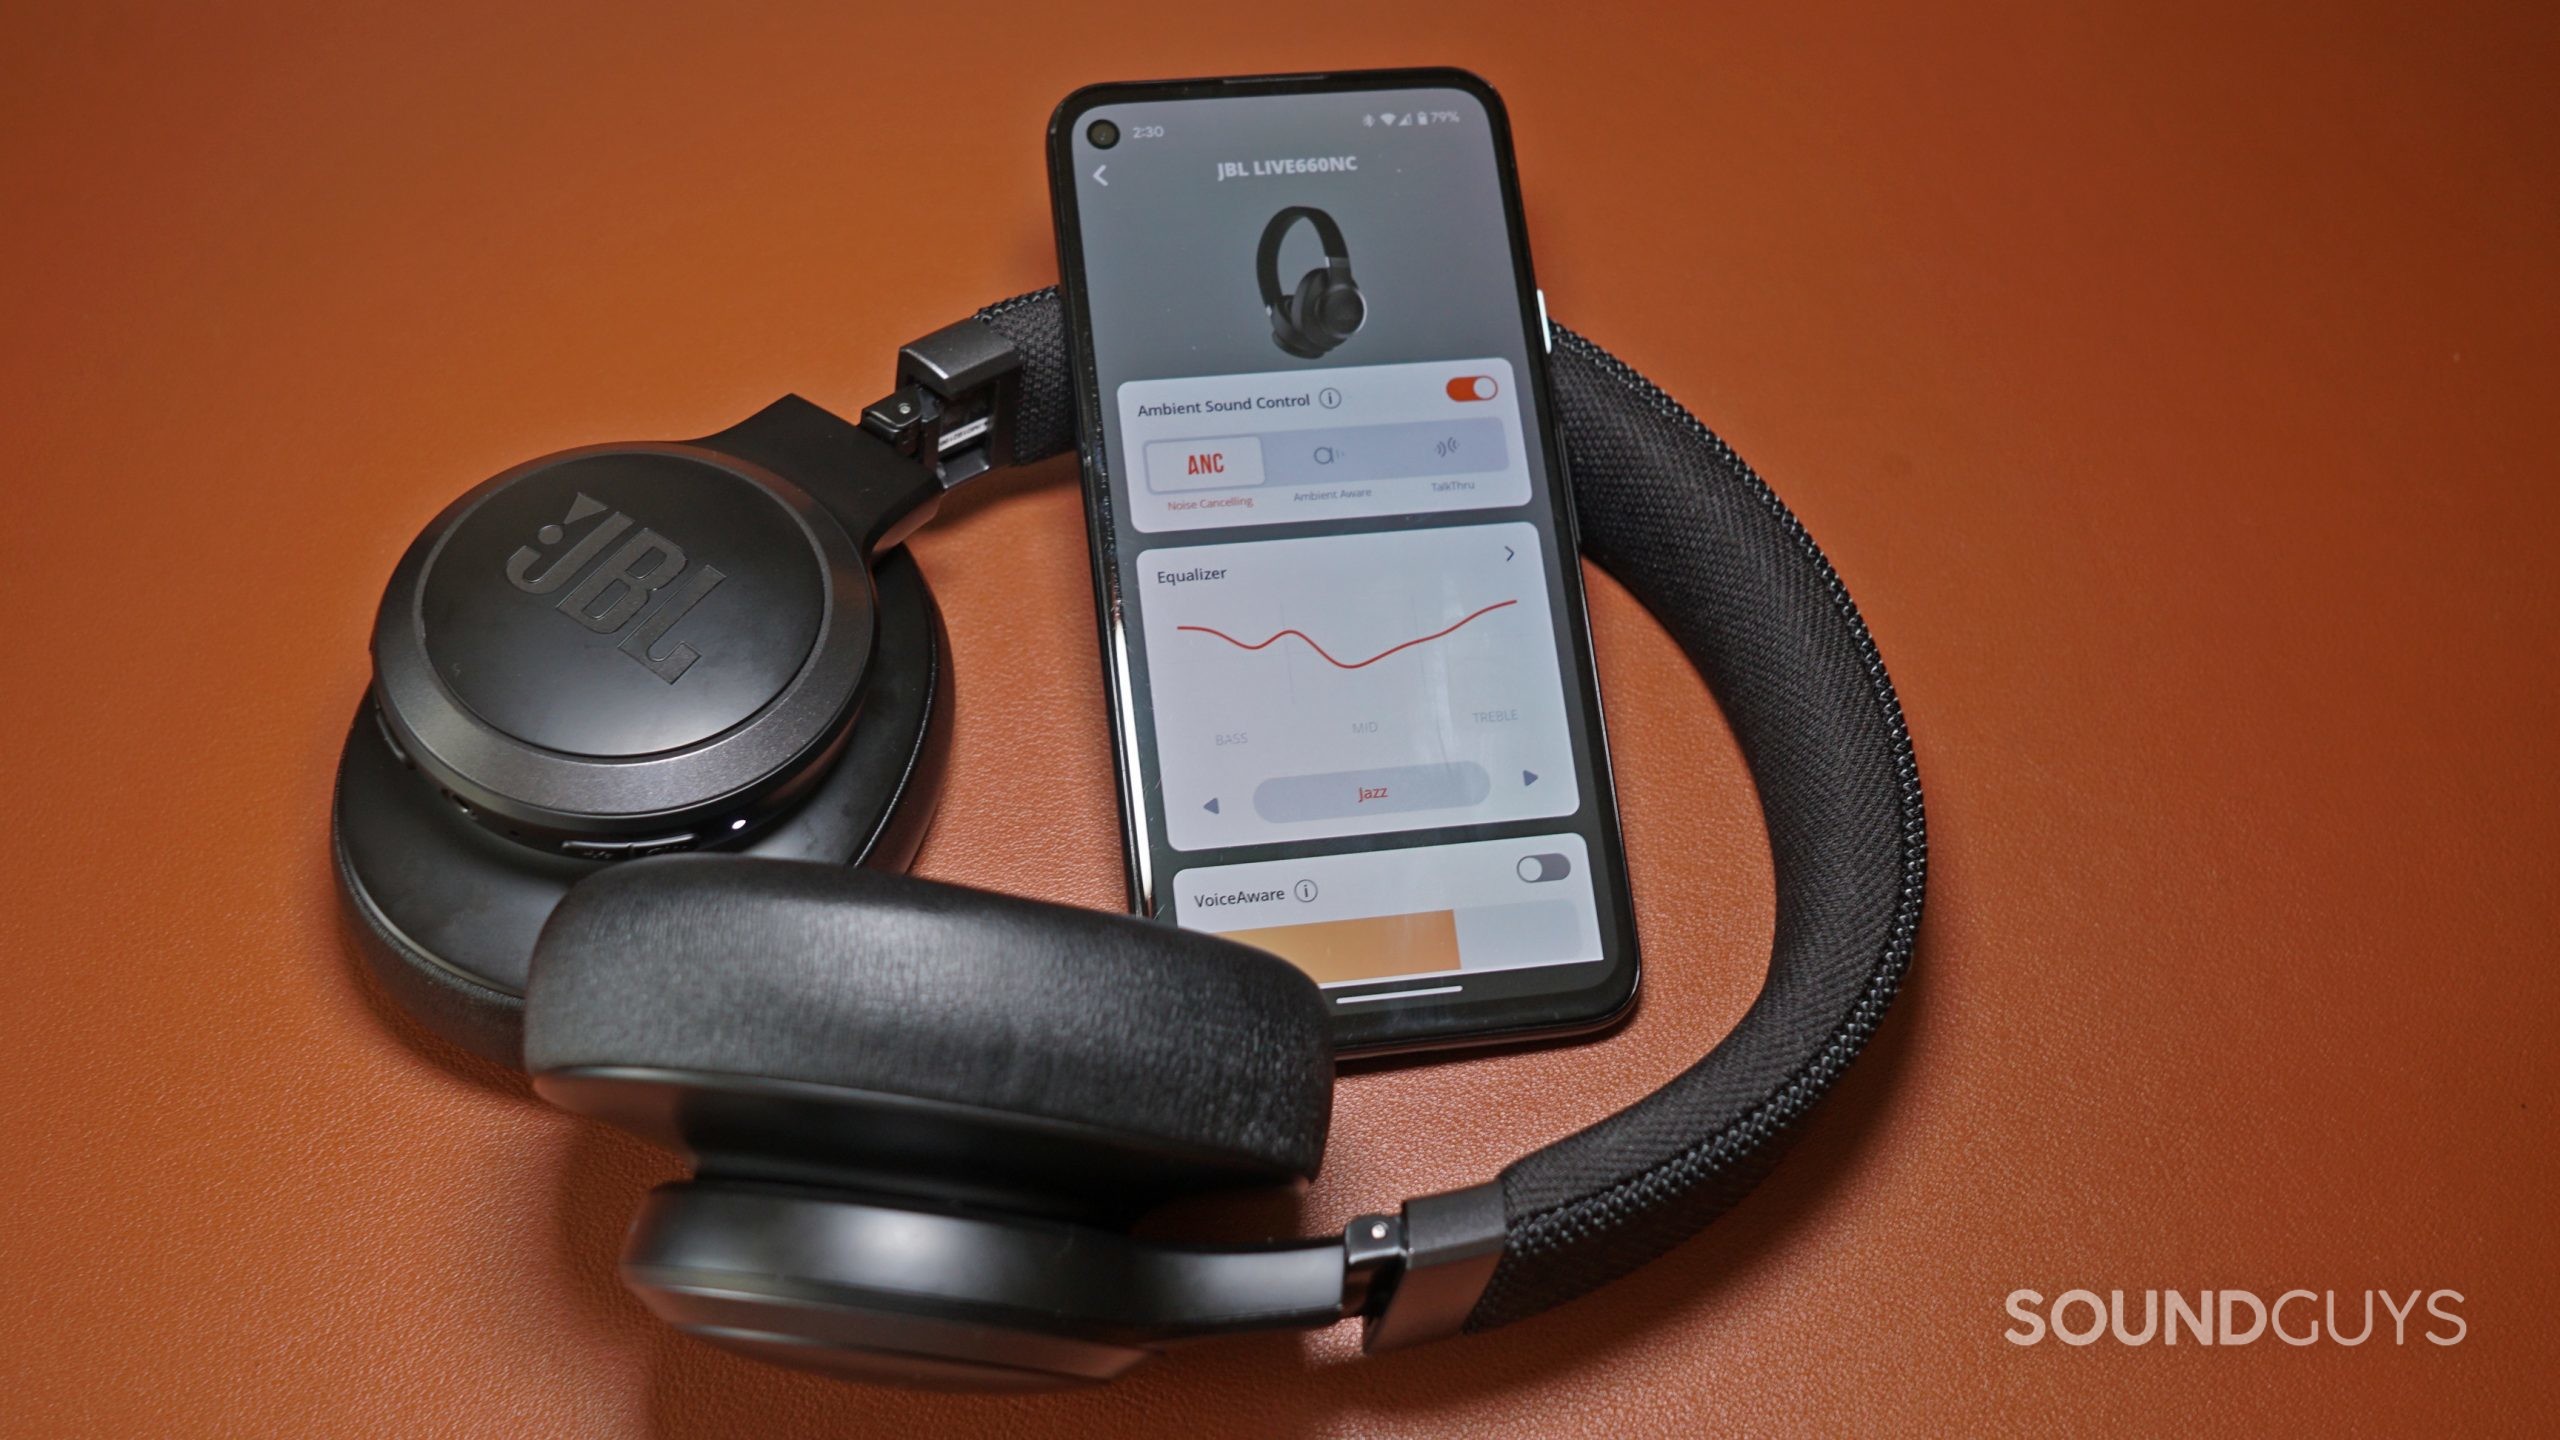 JBL Tune 660NC Review - $99 Bluetooth/Active Noise Cancelling Headphone 